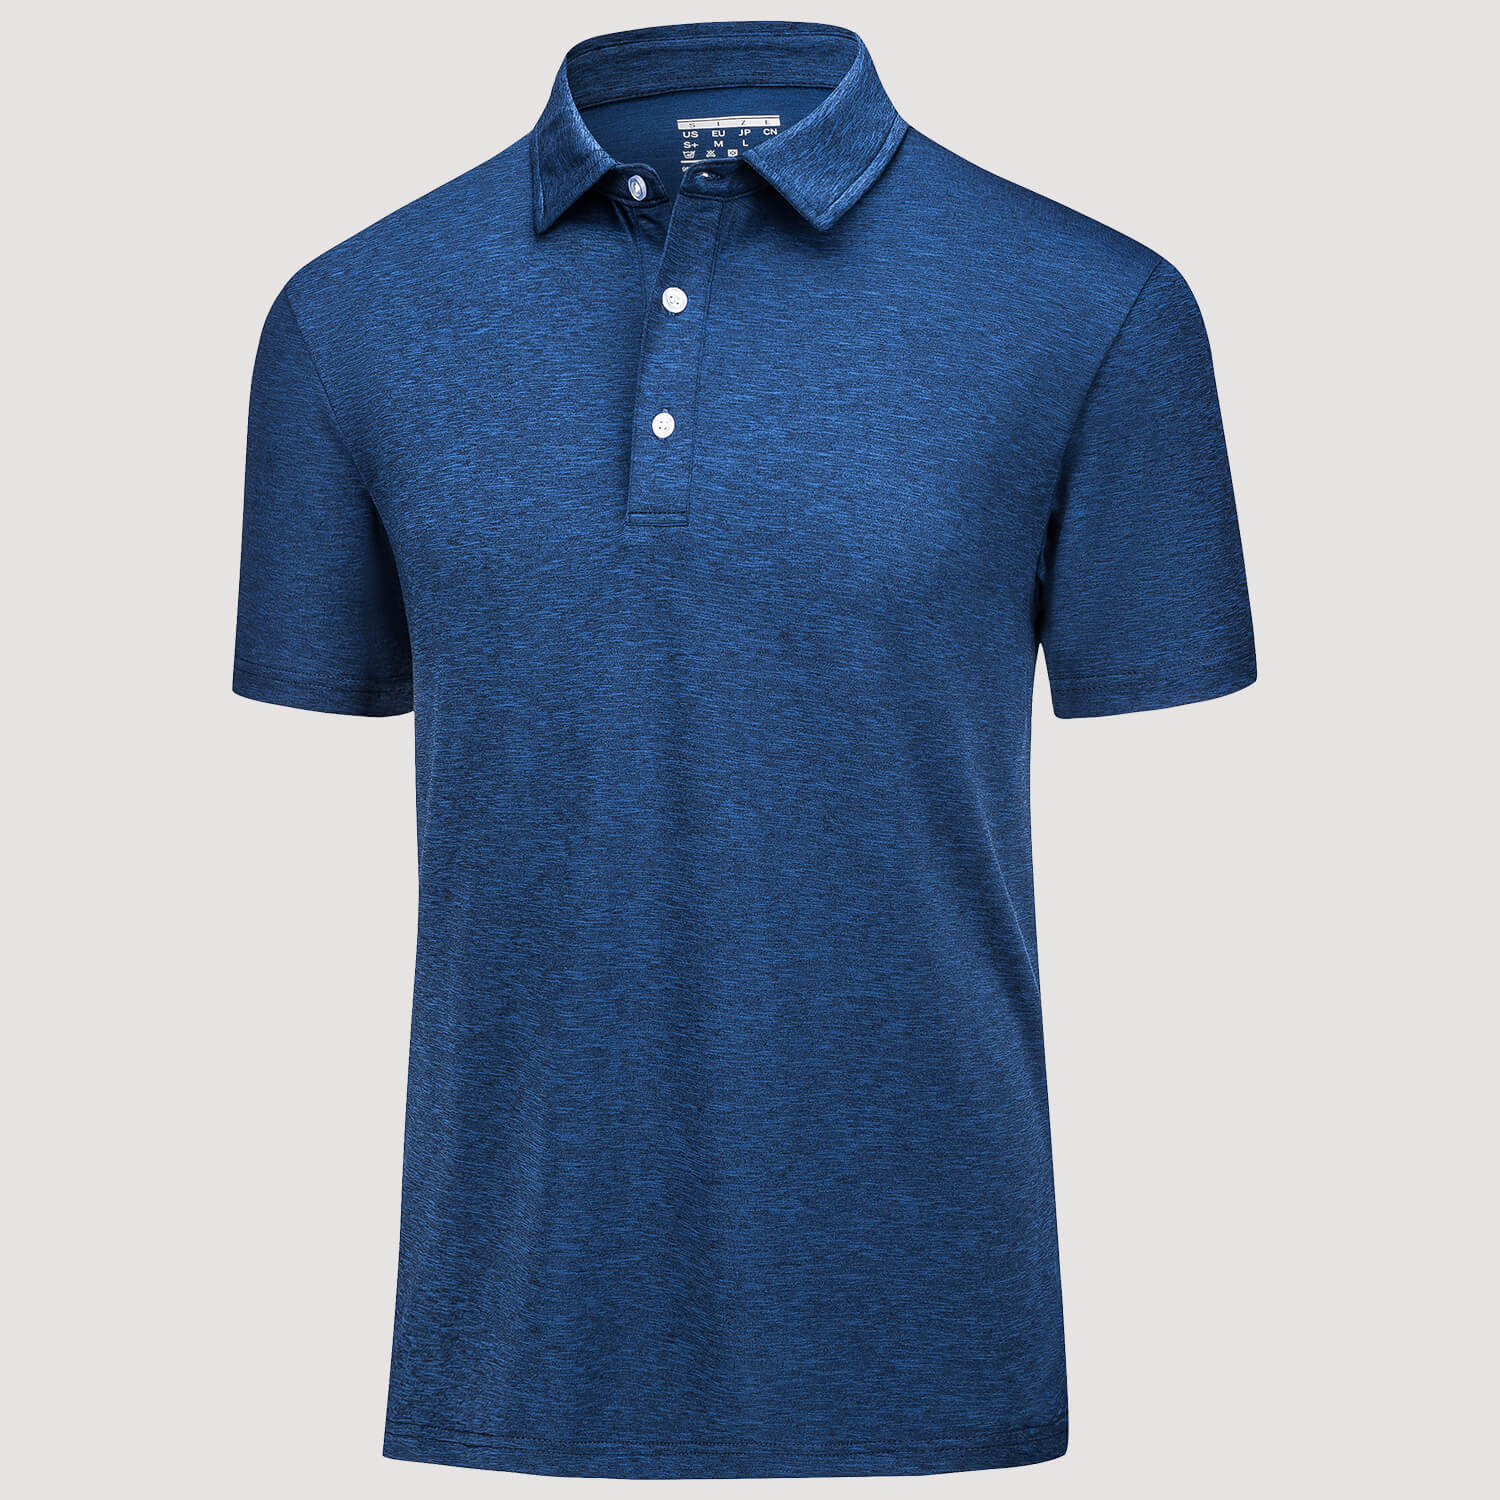 Men's Golf Polo T-Shirts with Buttons Moisture Wicking Sports Shirts